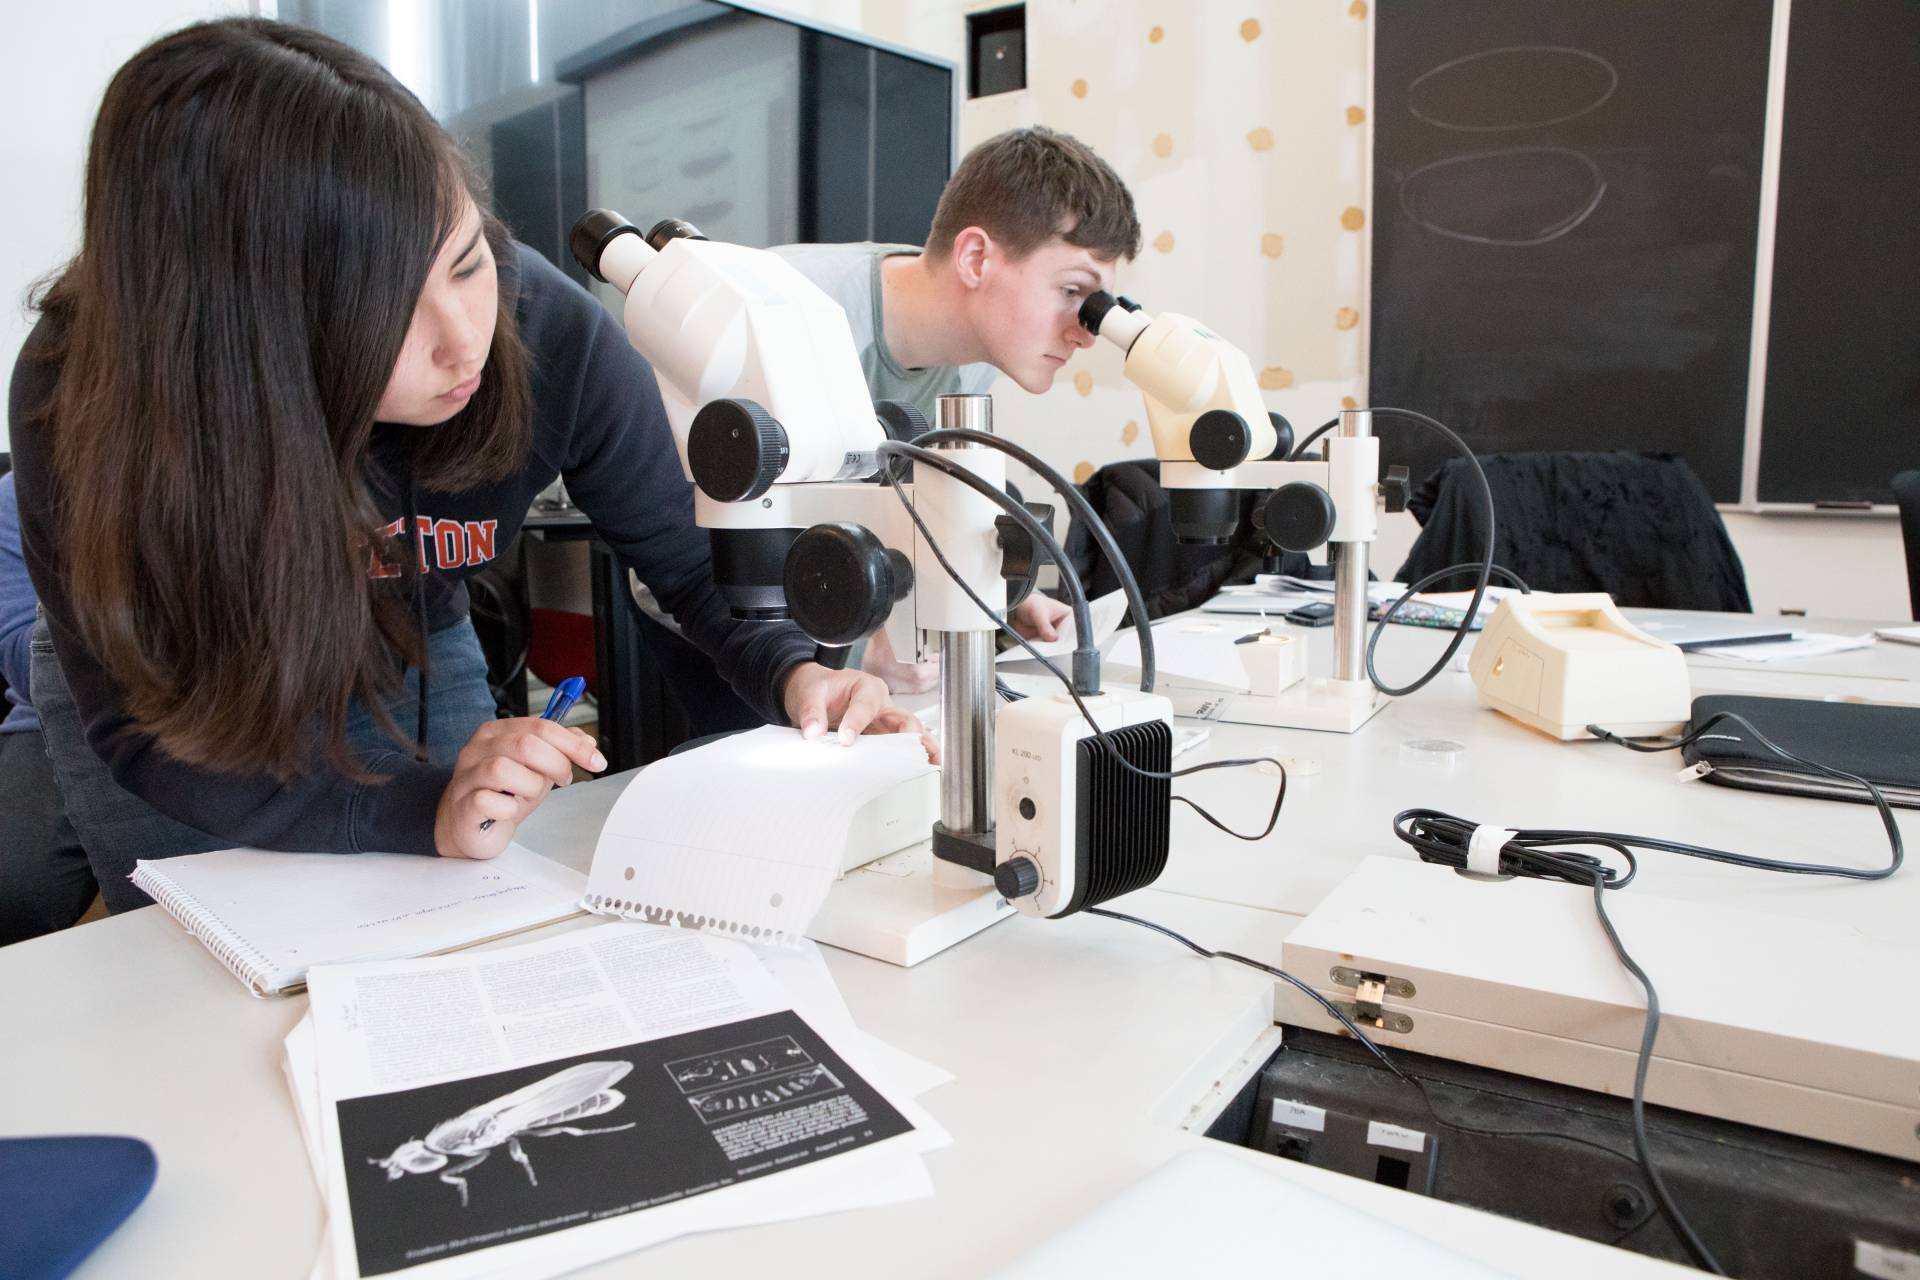 Kate Leung and Thomas Hoopes examine fruit flies under the microscope